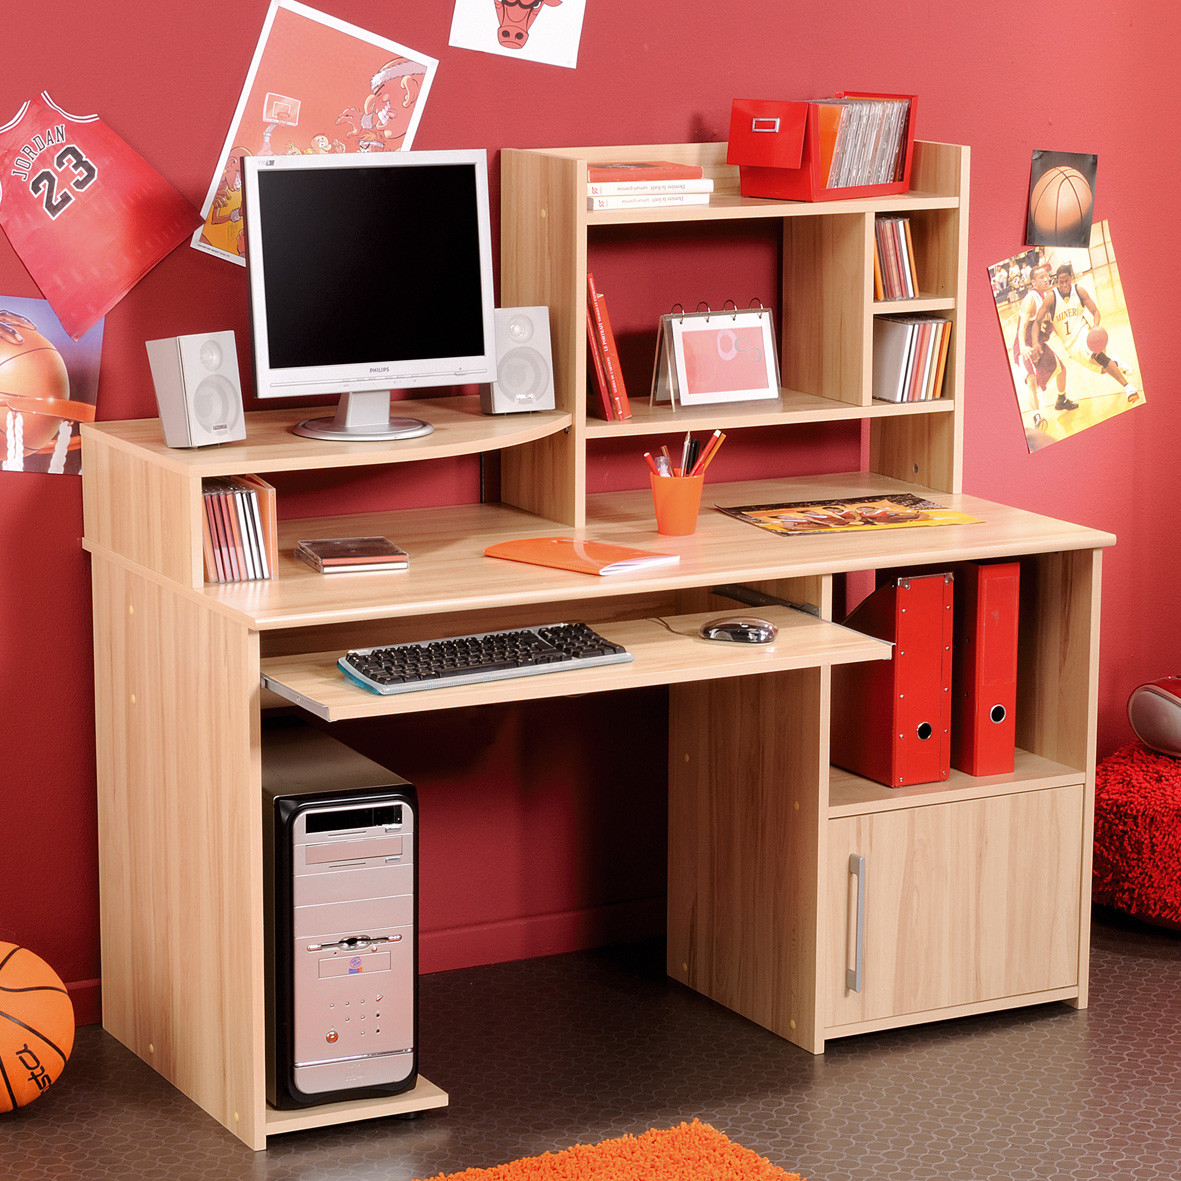 Children'S Desk With Storage
 Boost Your Kids Spirit to Study with Adorable Student Desk